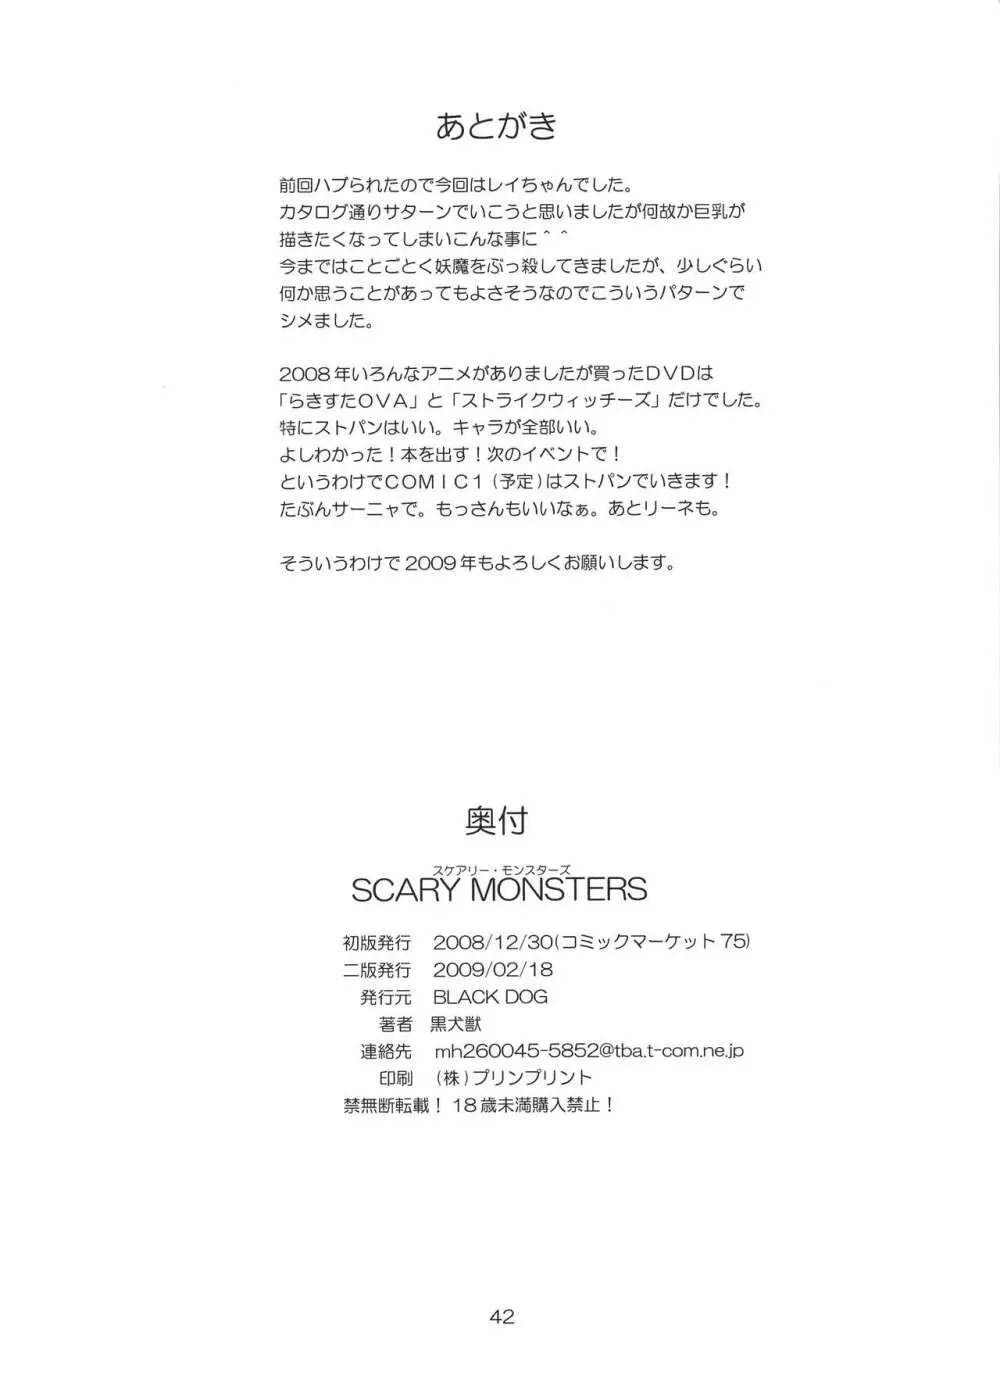 SCARY MONSTERS 42ページ